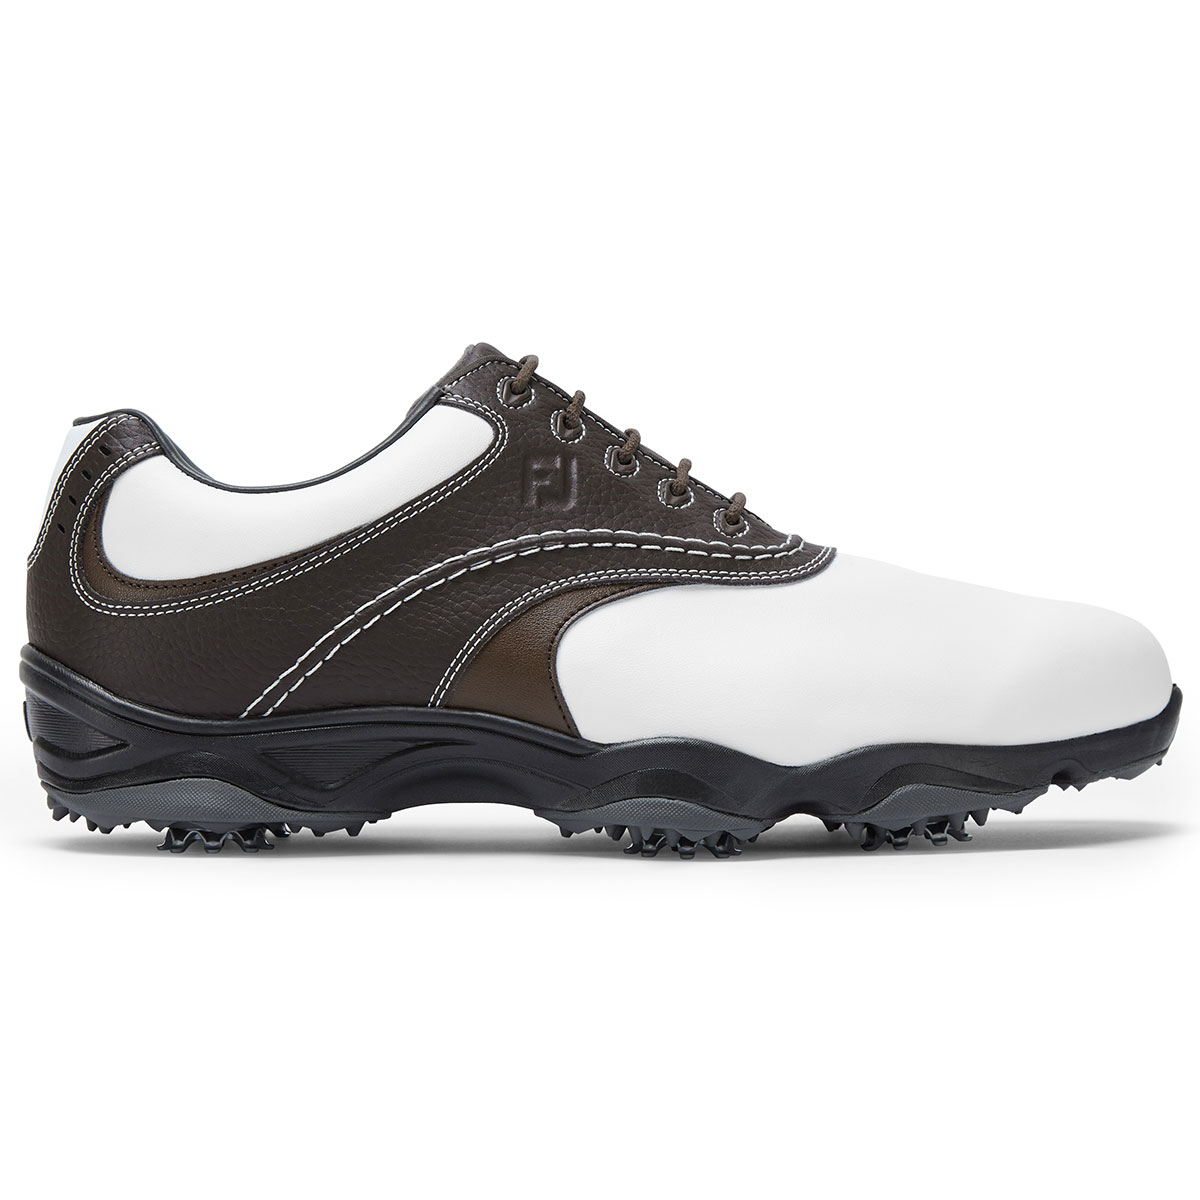 FootJoy Originals Shoes from american golf